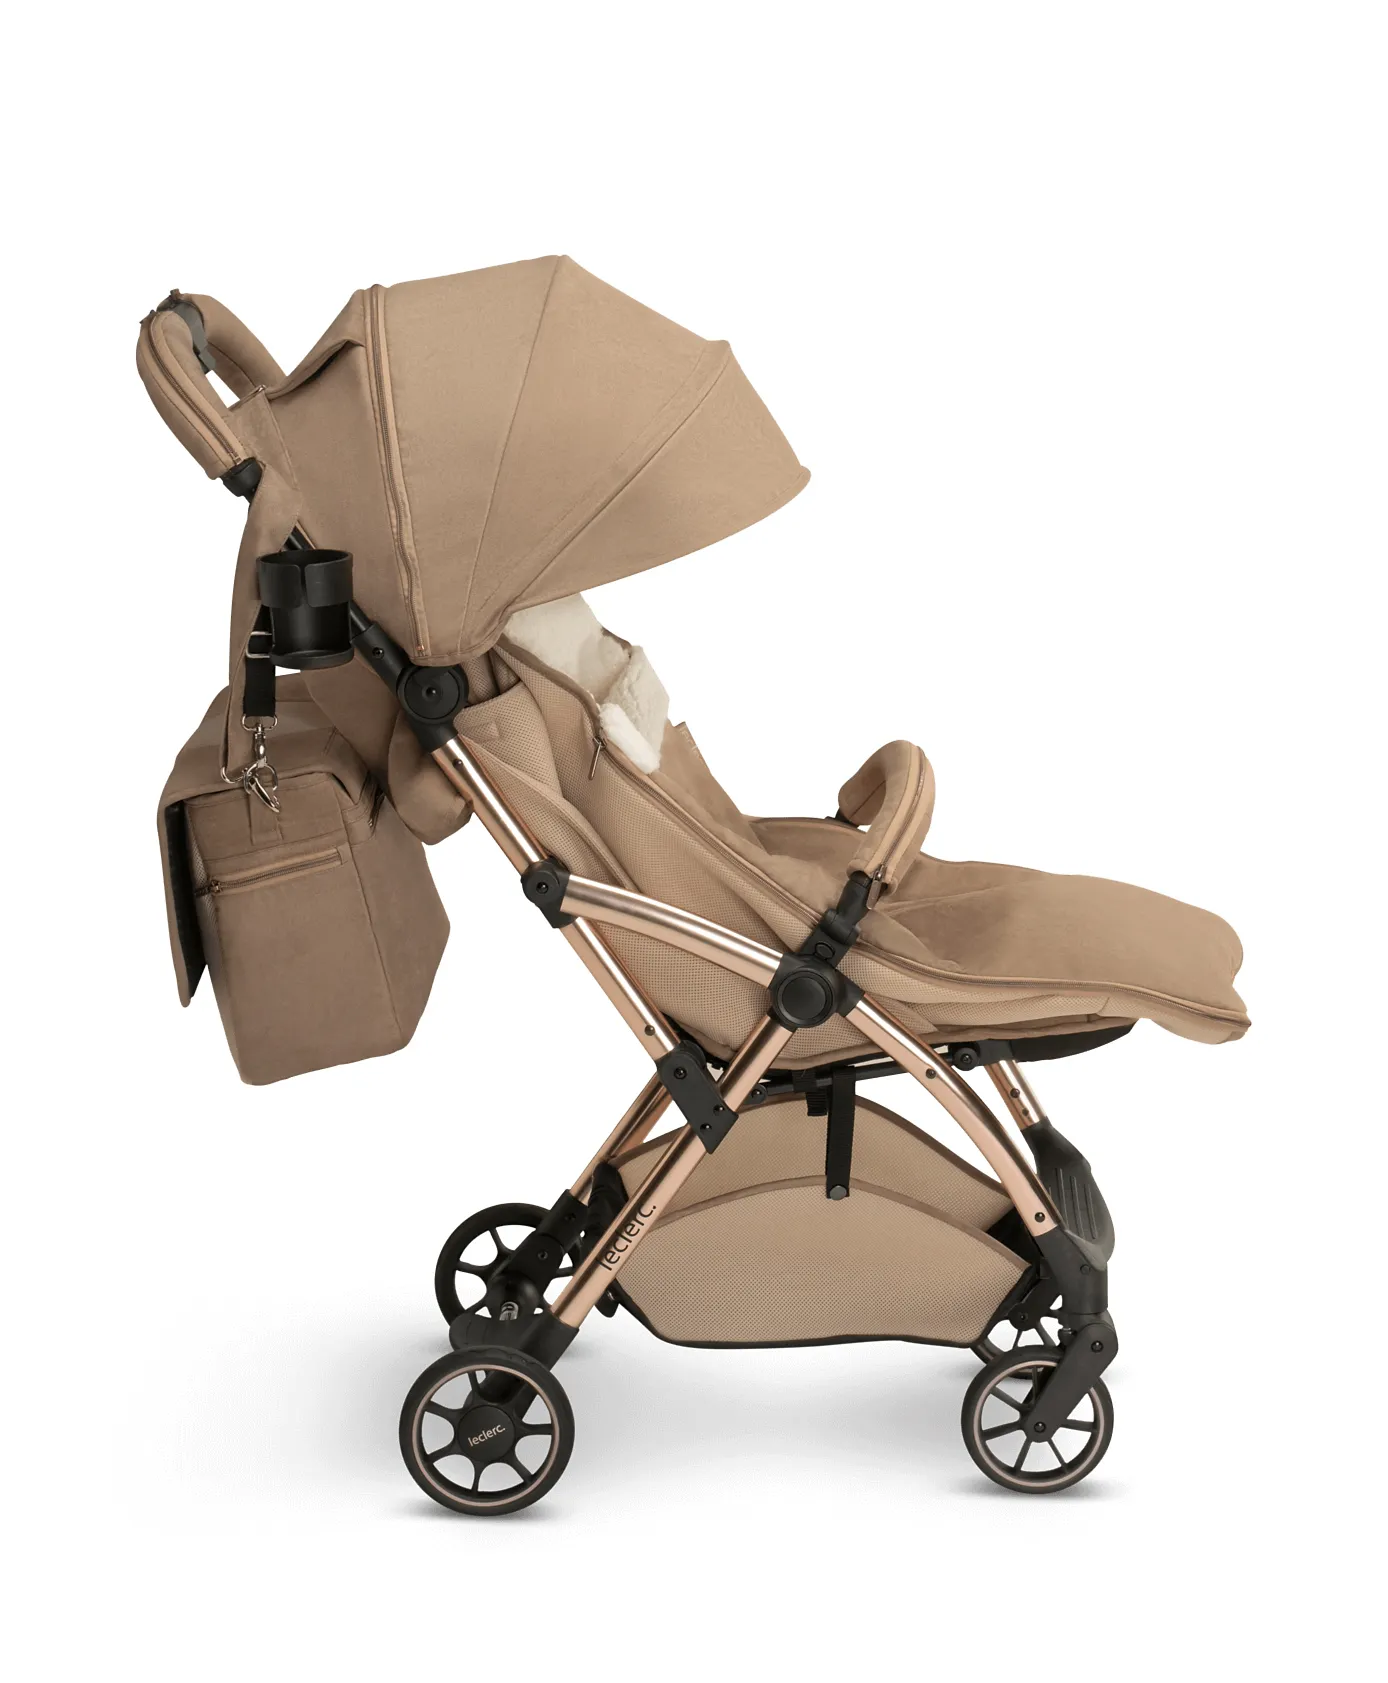 Leclerc Hexagon Stroller - Champaign Online in UAE, Buy at Best Price ...